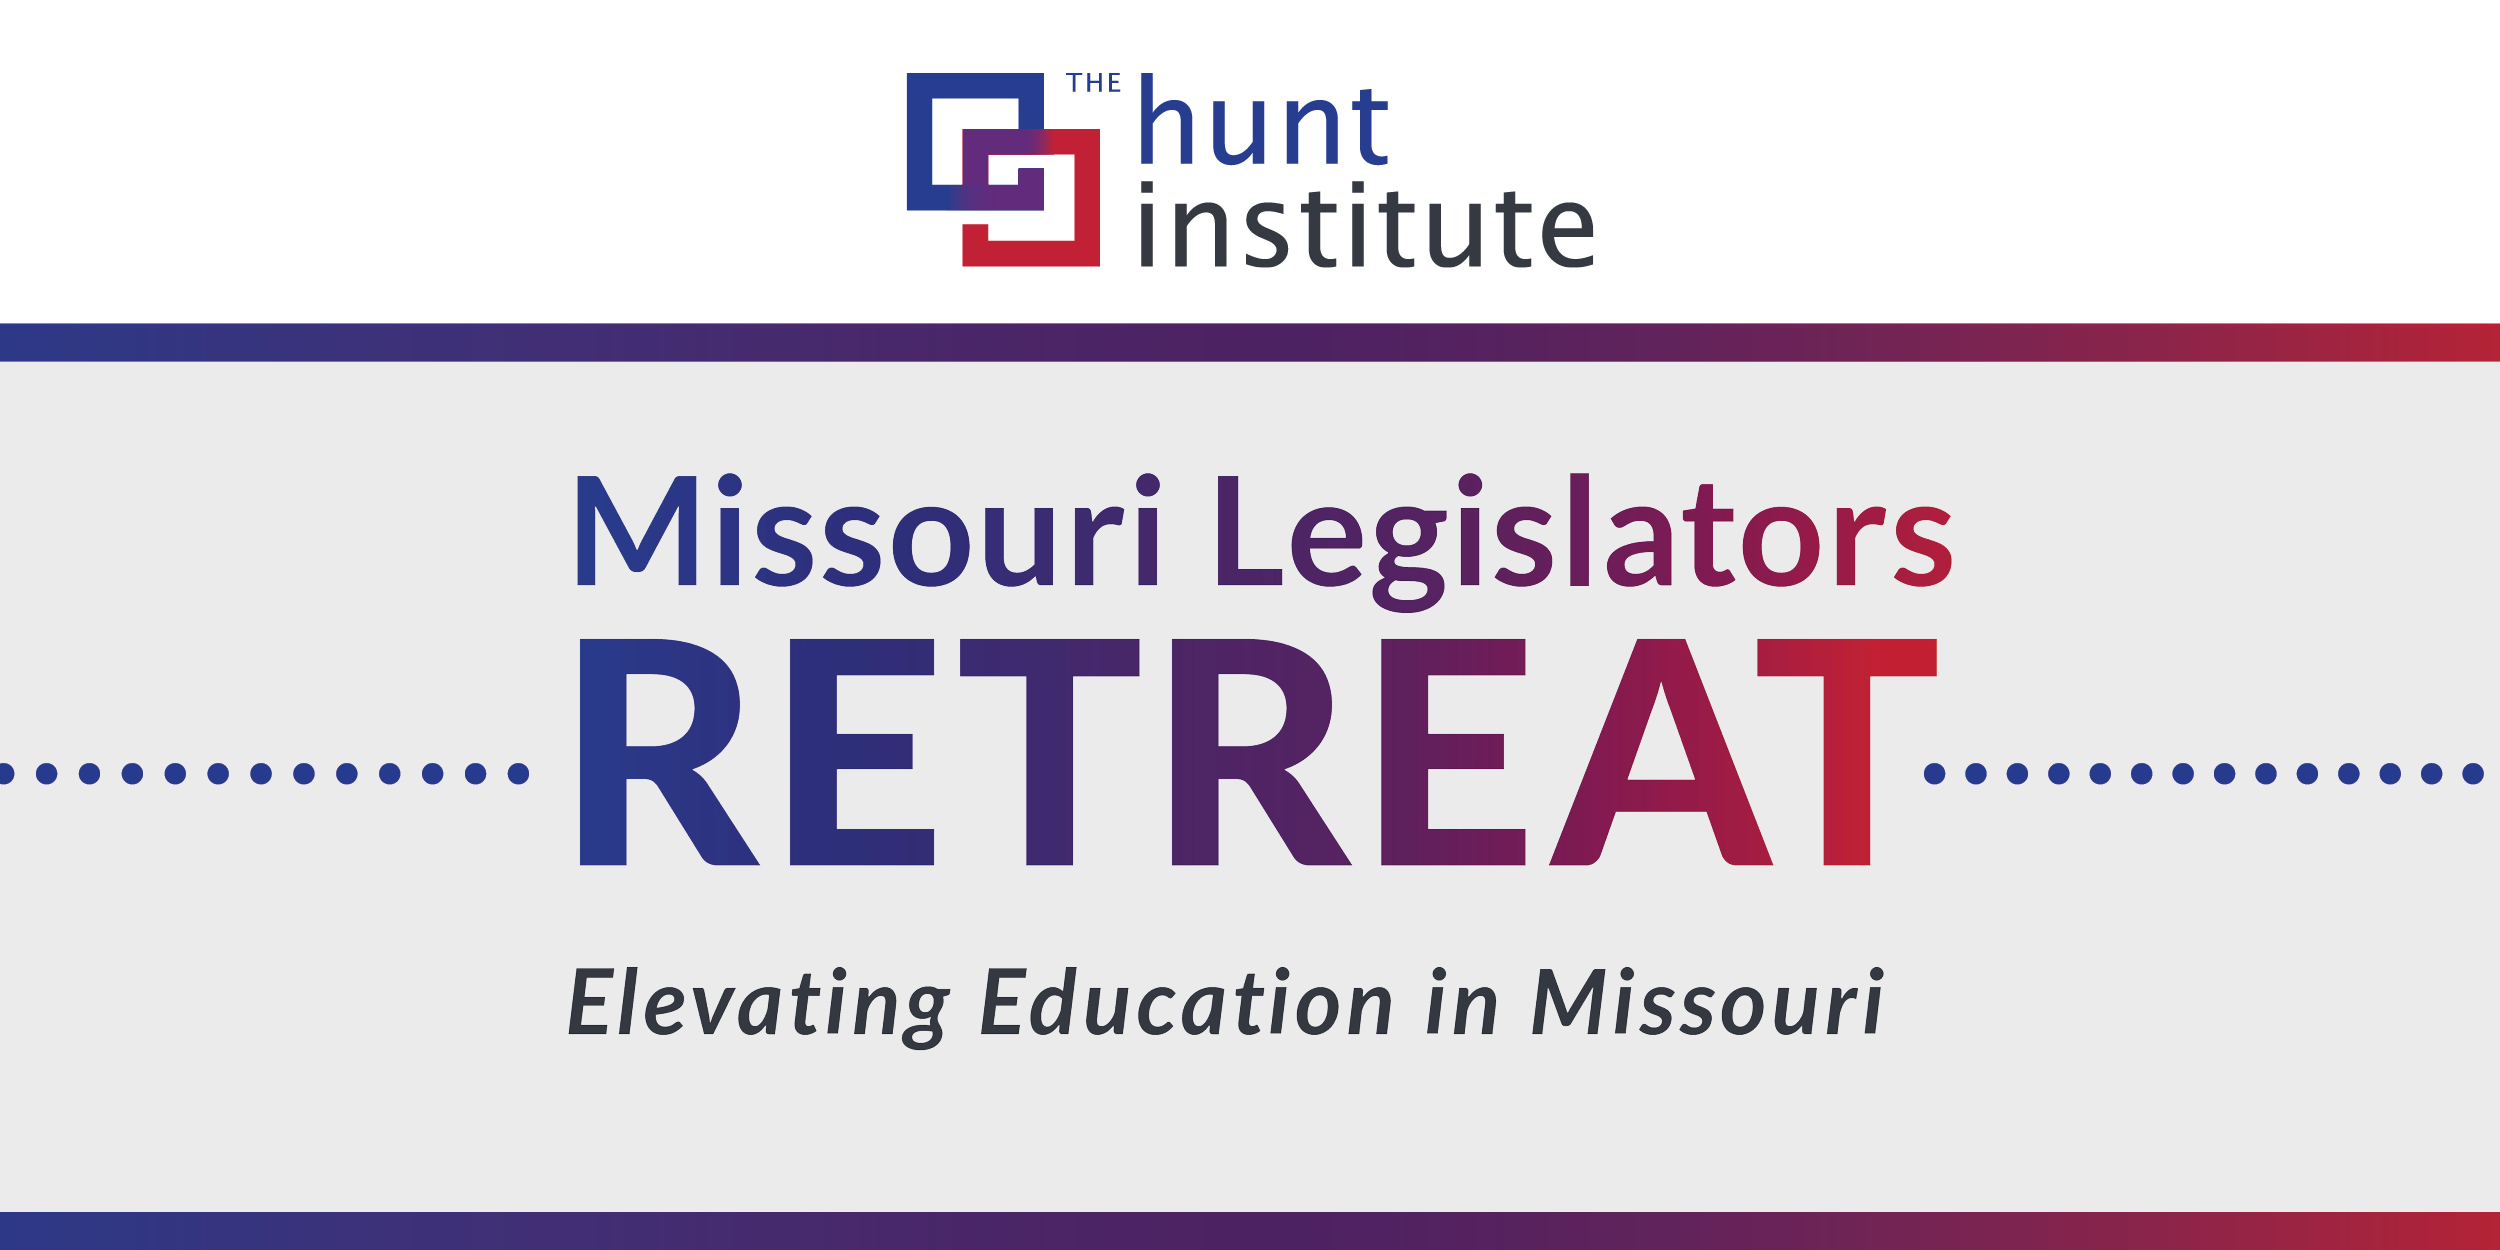 Missouri Legislators Convene with State and National Education Experts to Discuss Timely Education Policies - The Hunt Institute